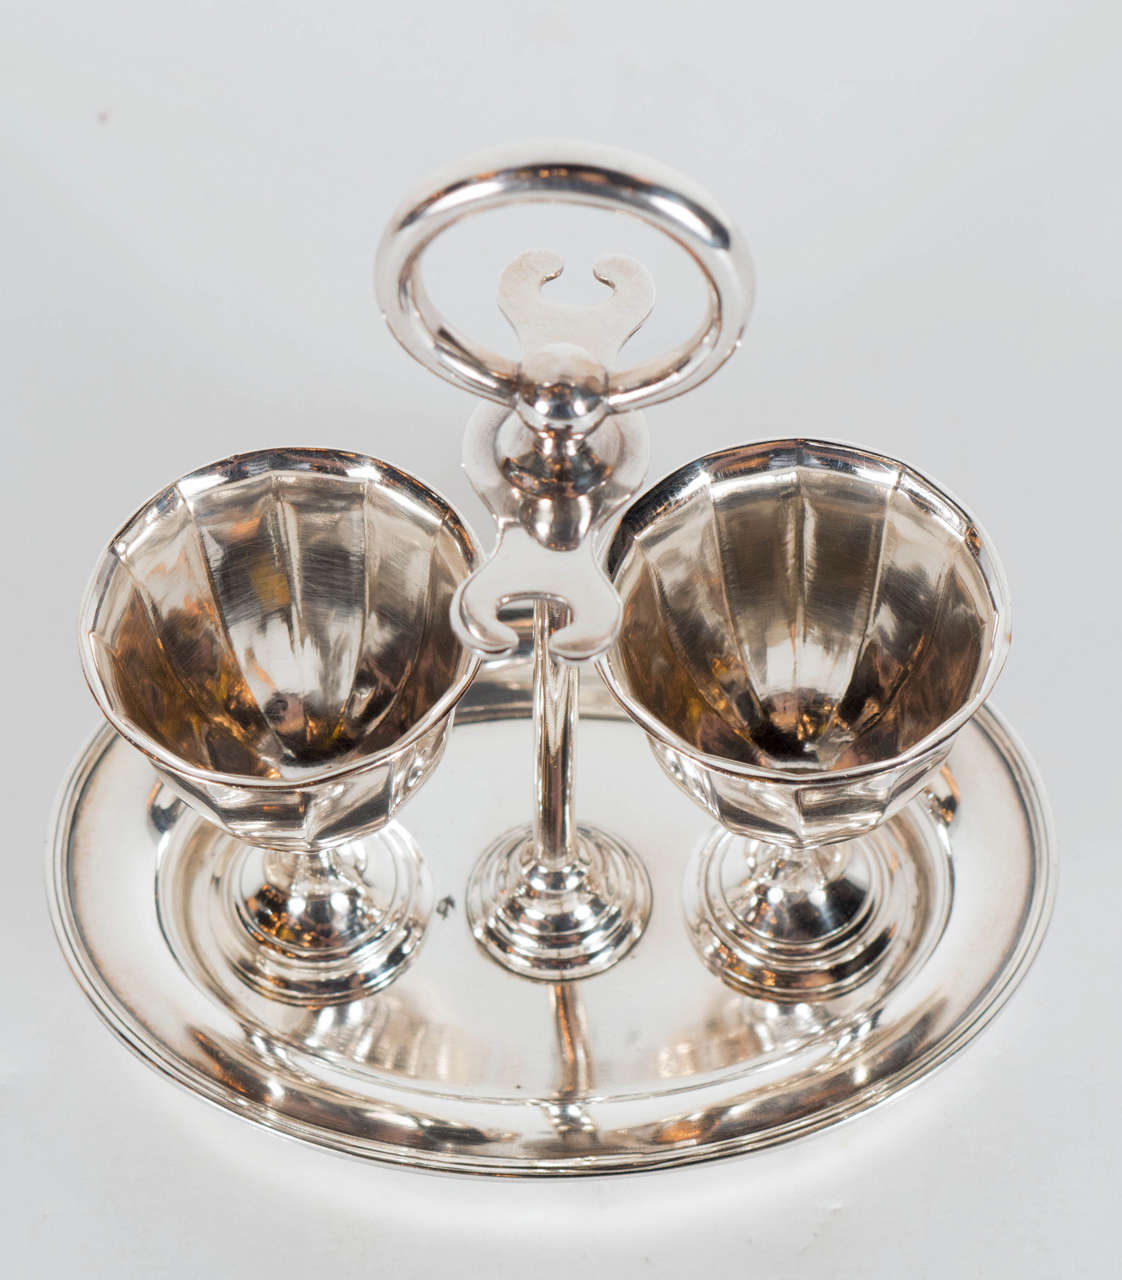 English Art Deco Silver Plate Egg Cup Set by Daniel and Arter